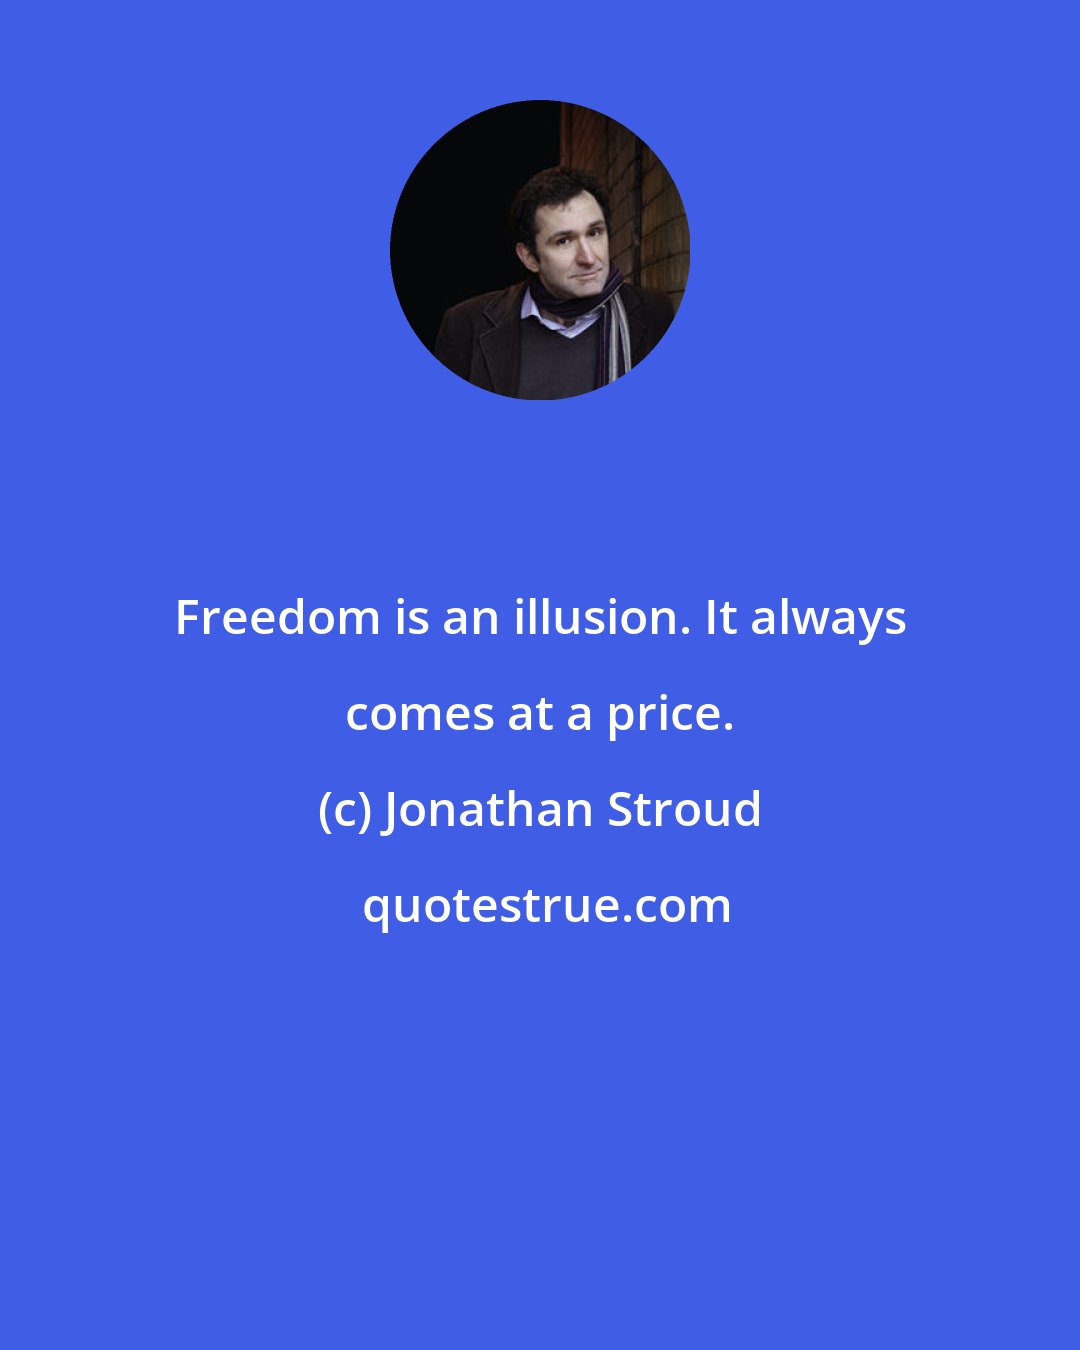 Jonathan Stroud: Freedom is an illusion. It always comes at a price.